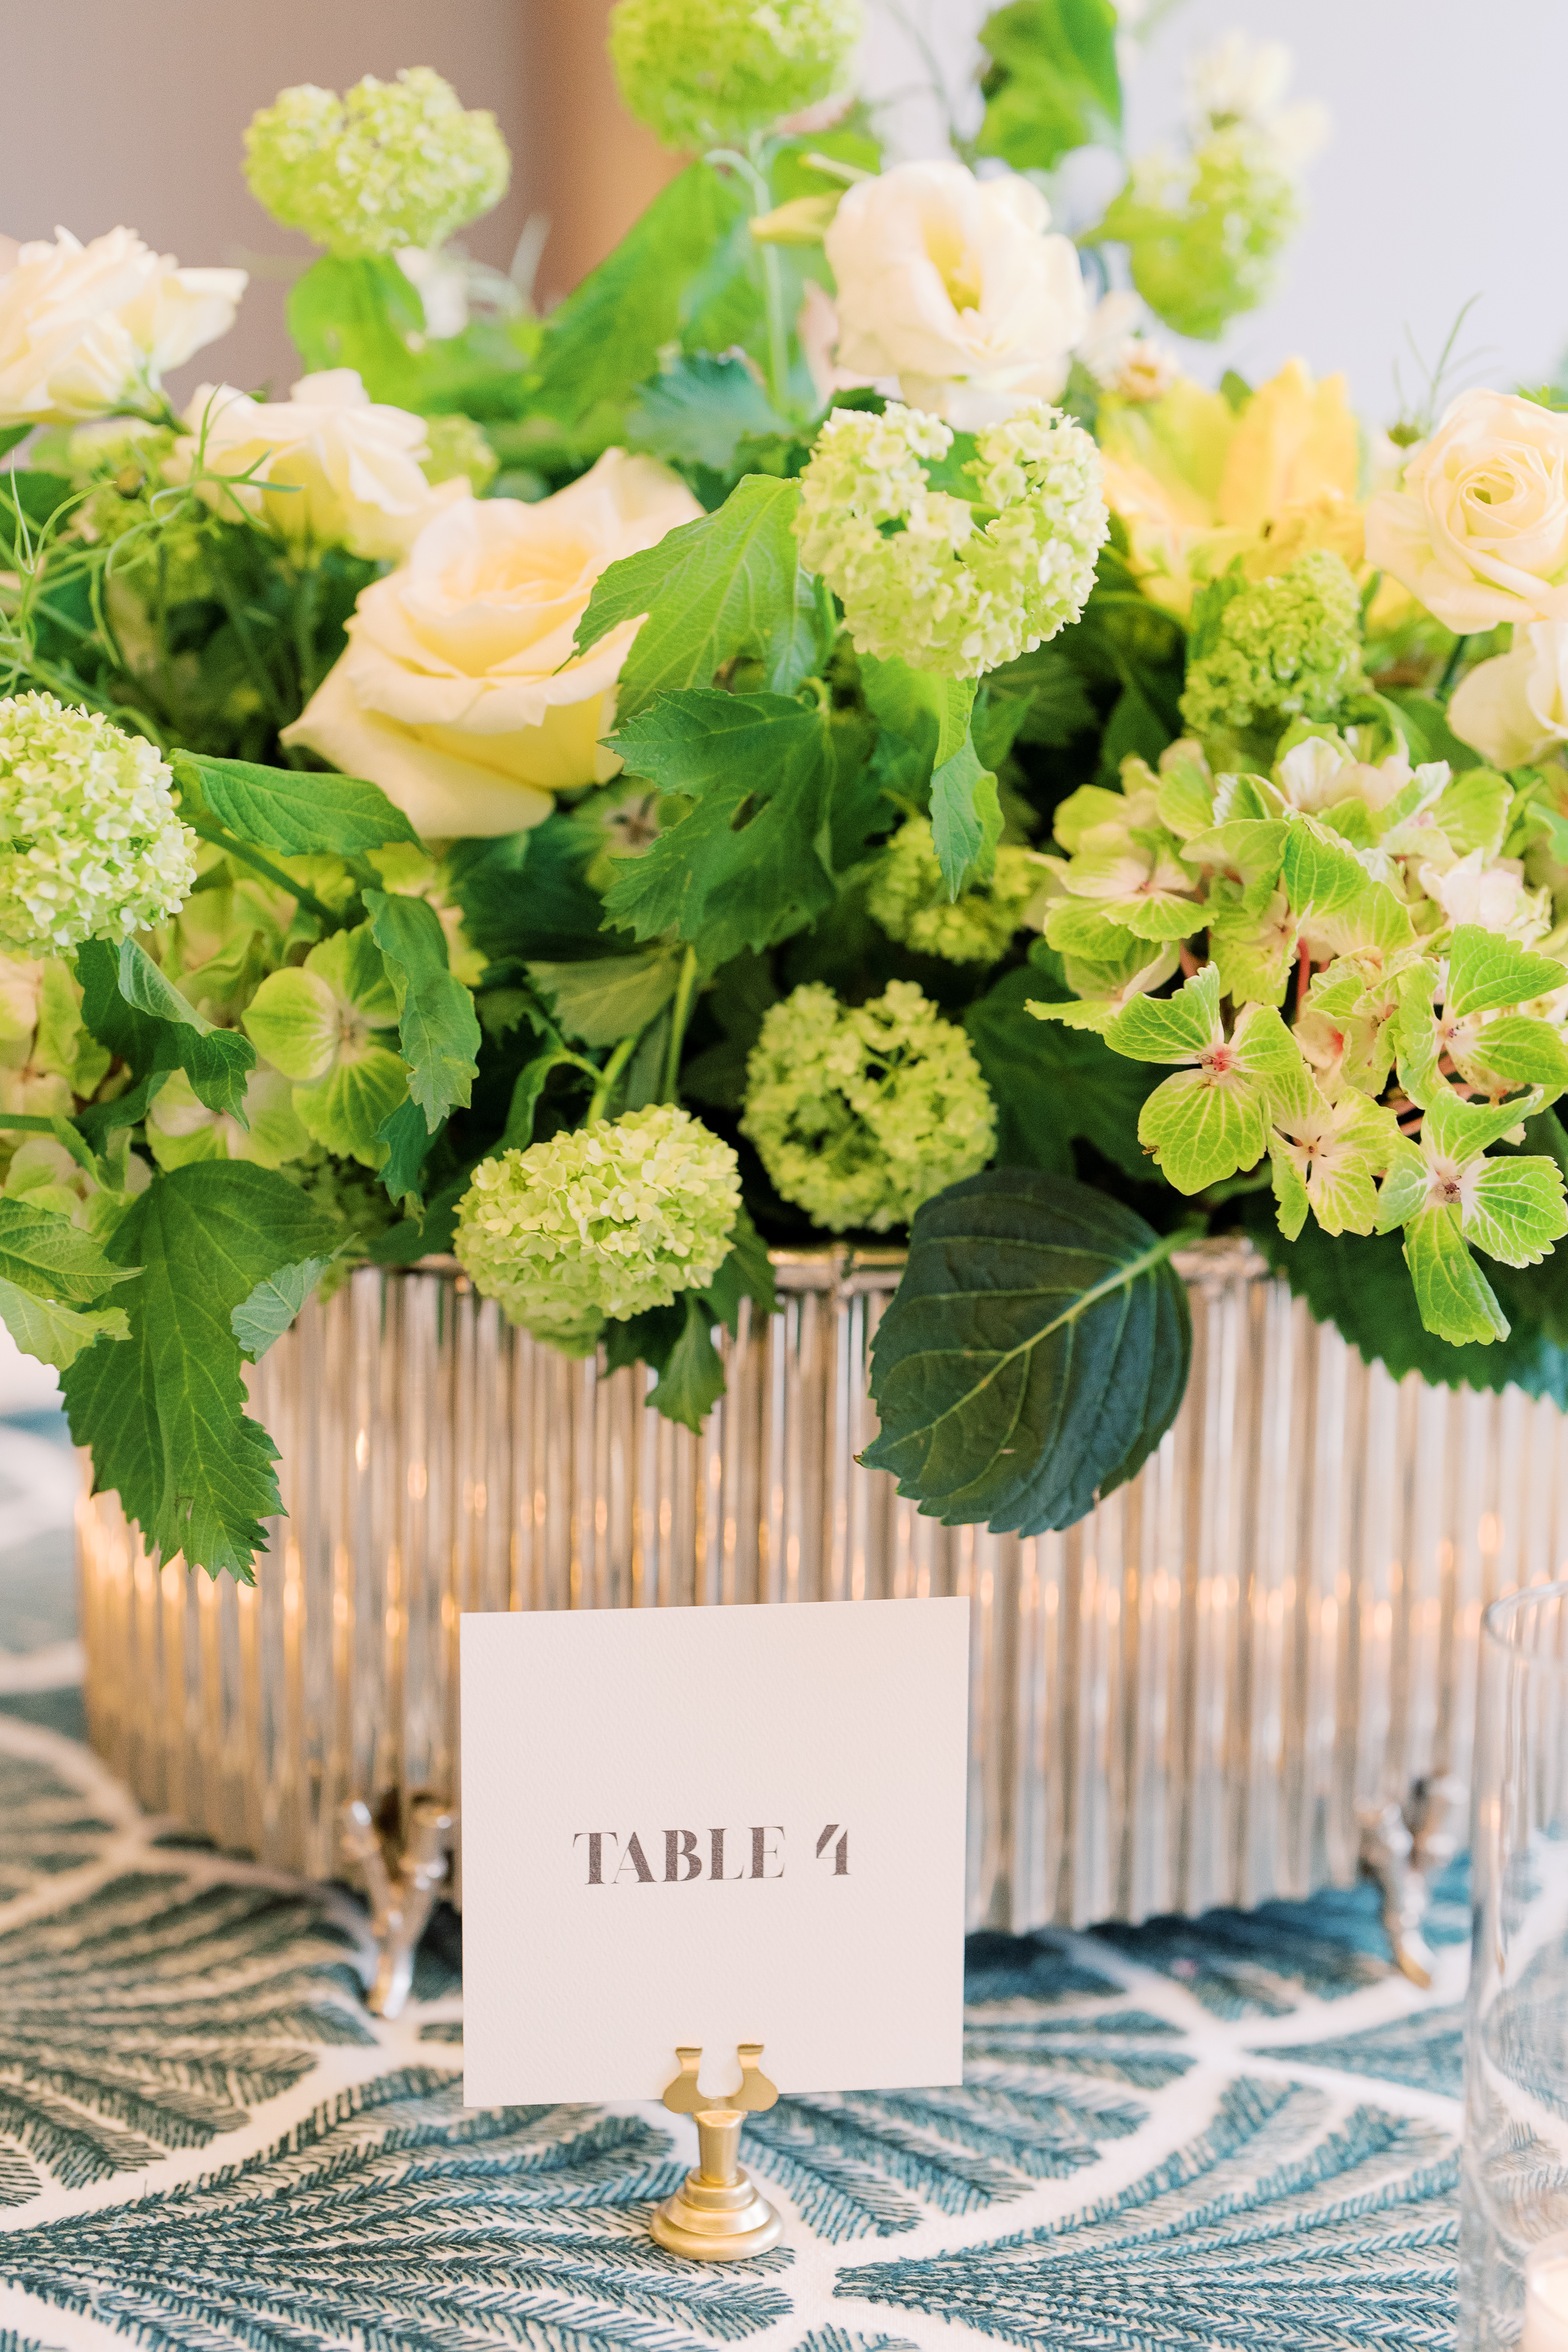 Table number signage on table setting.